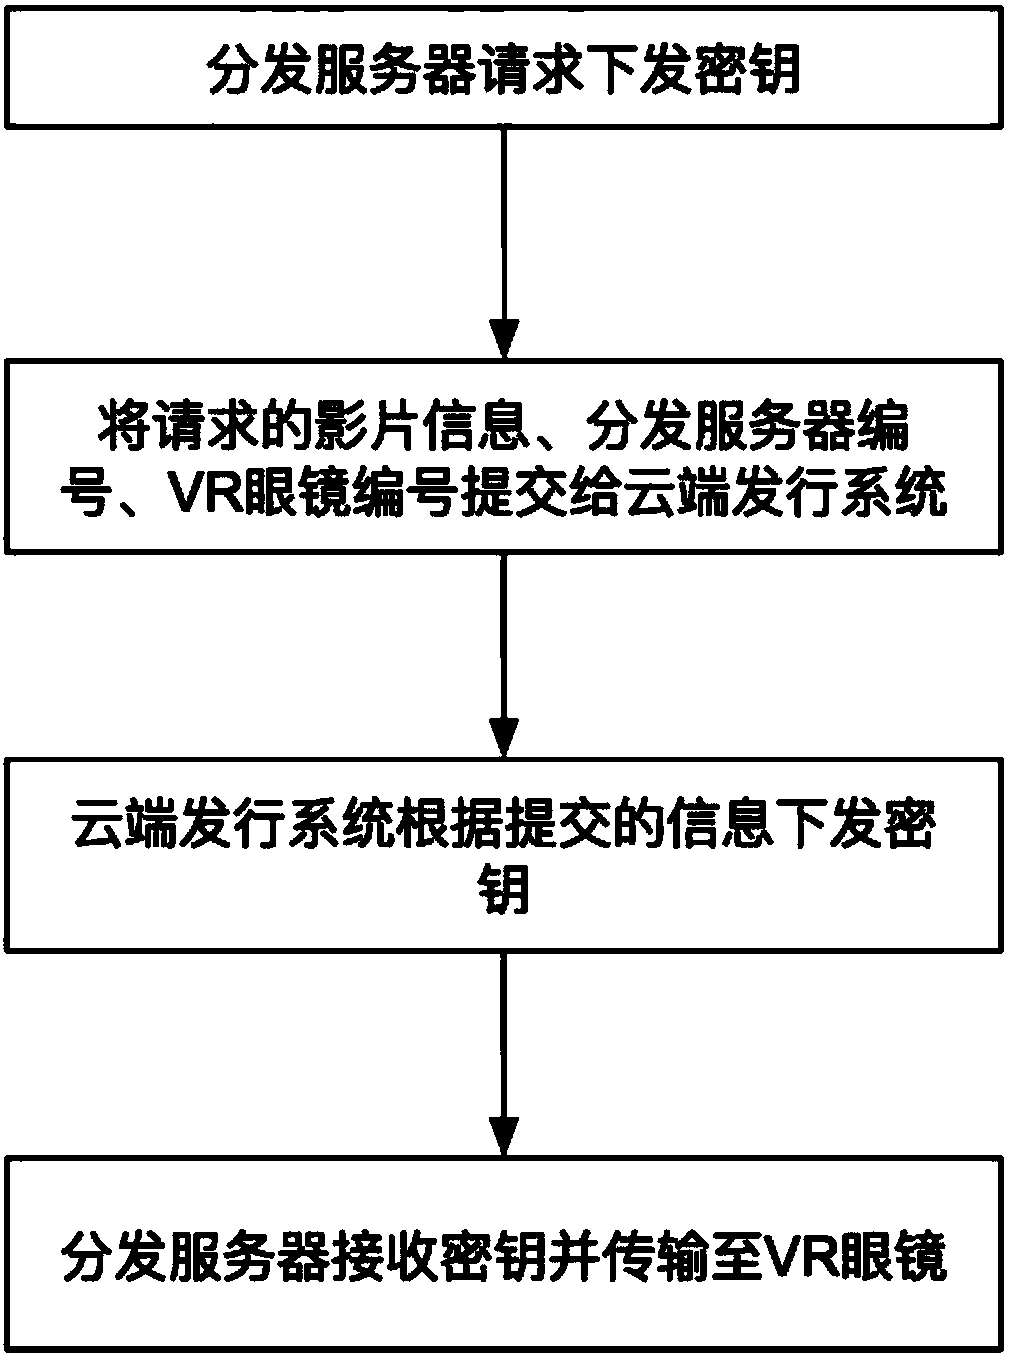 Virtual reality theater issuing system